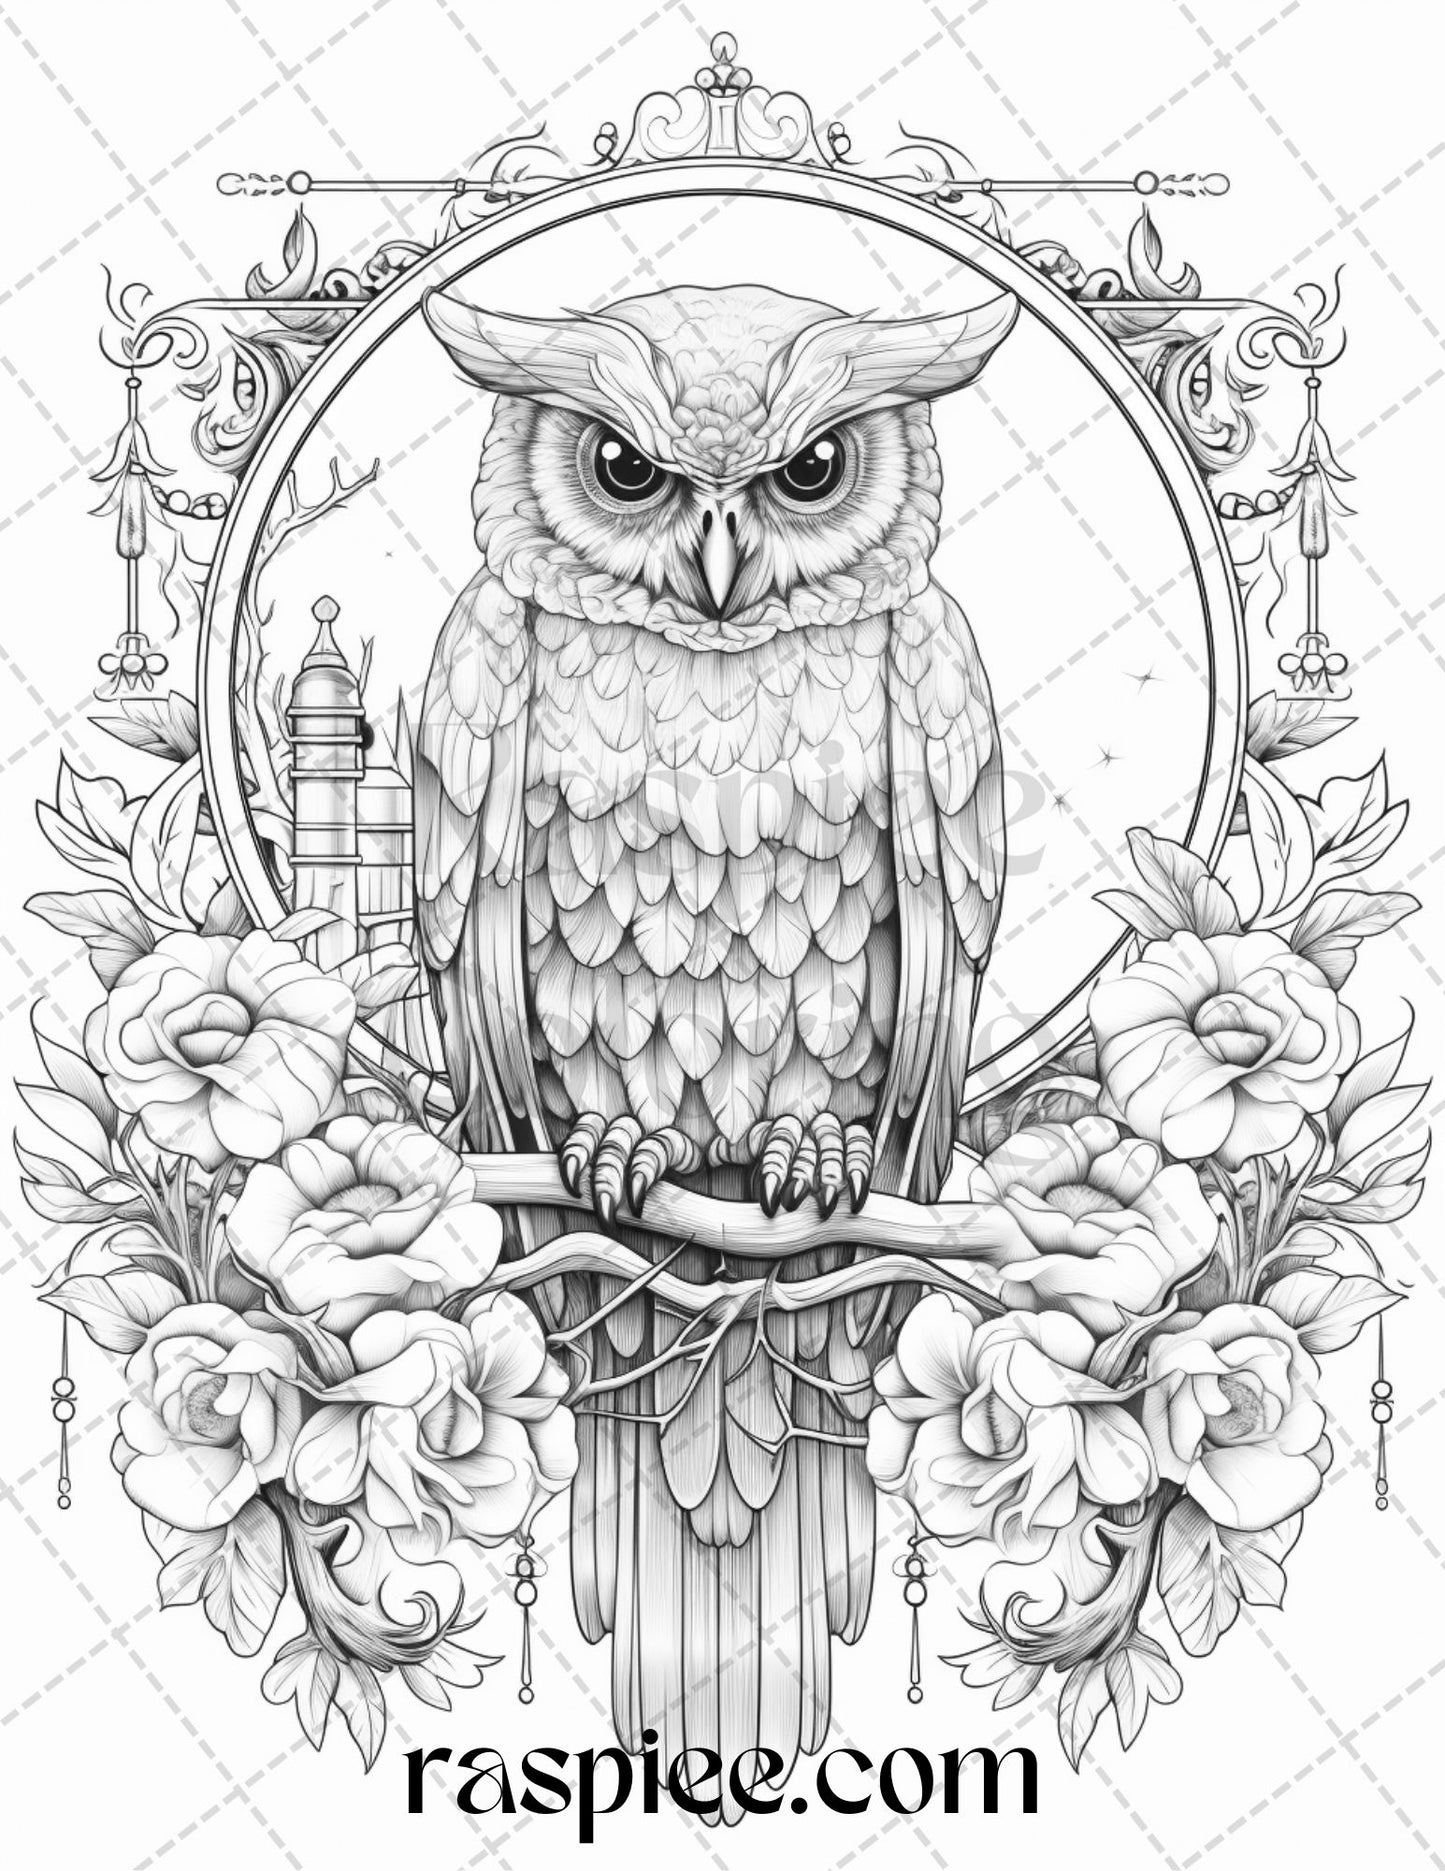 Floral Owl Grayscale Coloring Page, Adult Printable Coloring Art, Detailed Owl Coloring Illustration, Floral Animal Coloring Page, Intricate Adult Coloring PDF, Mindful Relaxation Coloring, Stress Relief Coloring Sheet